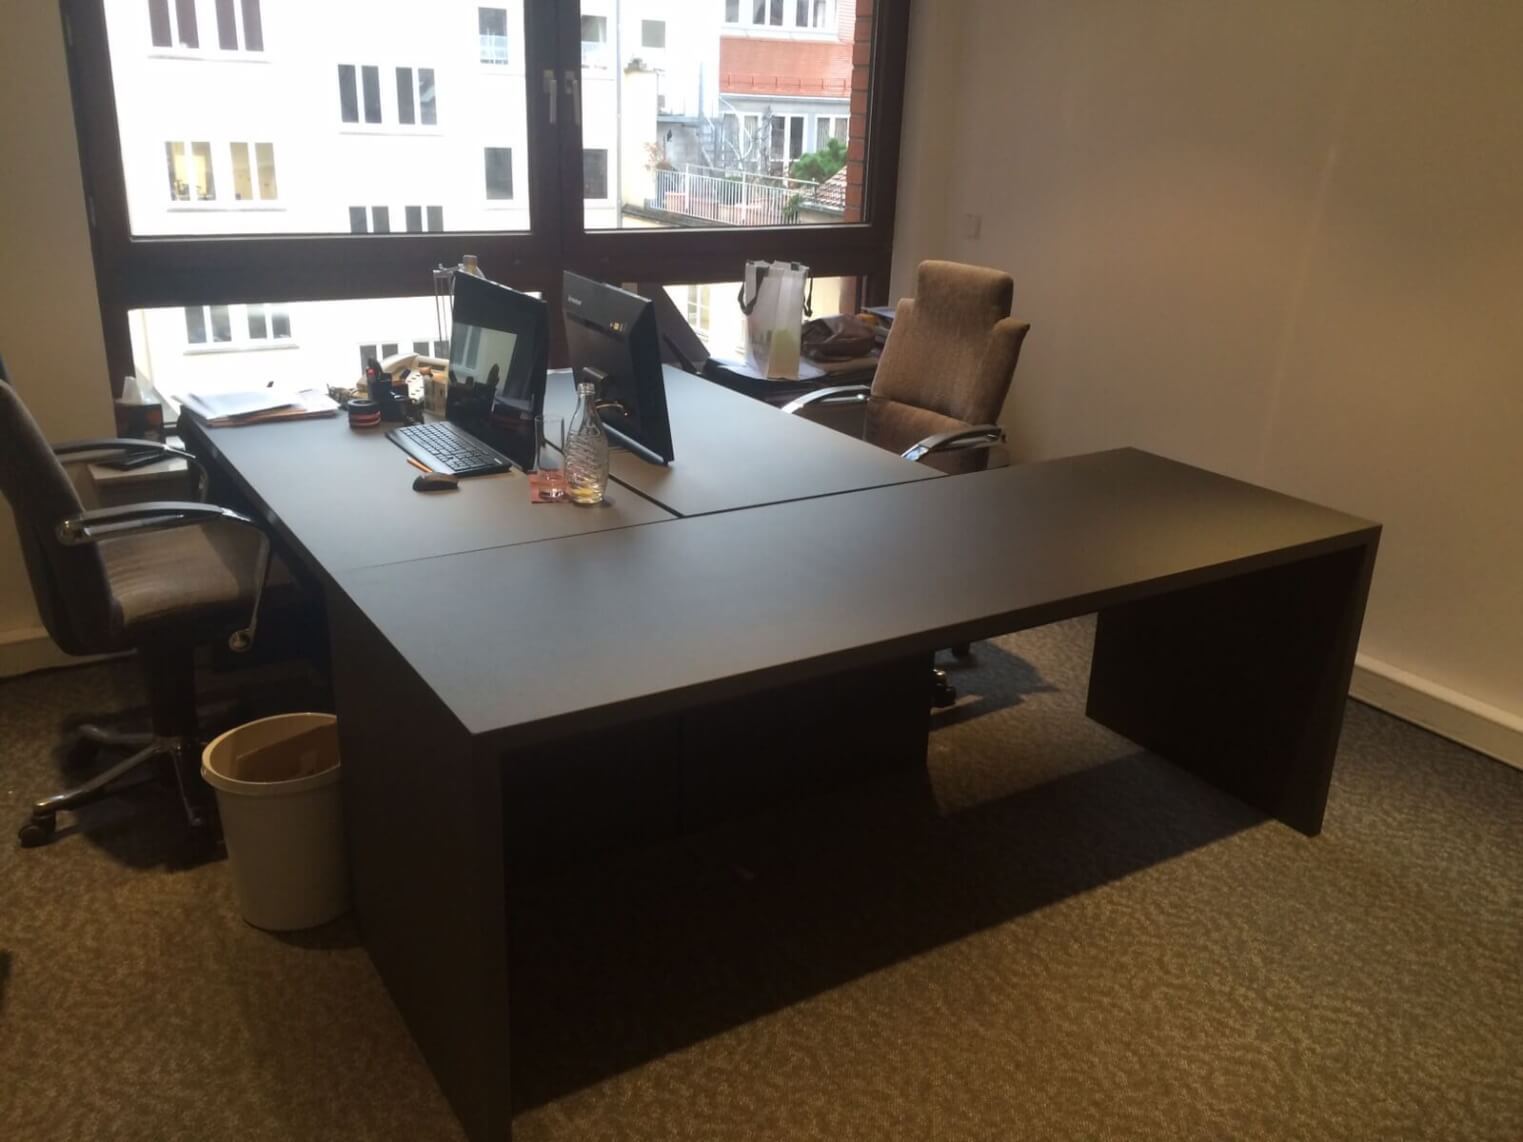 Re-covering an office desk in grey rather than red, cost example, pictures - after